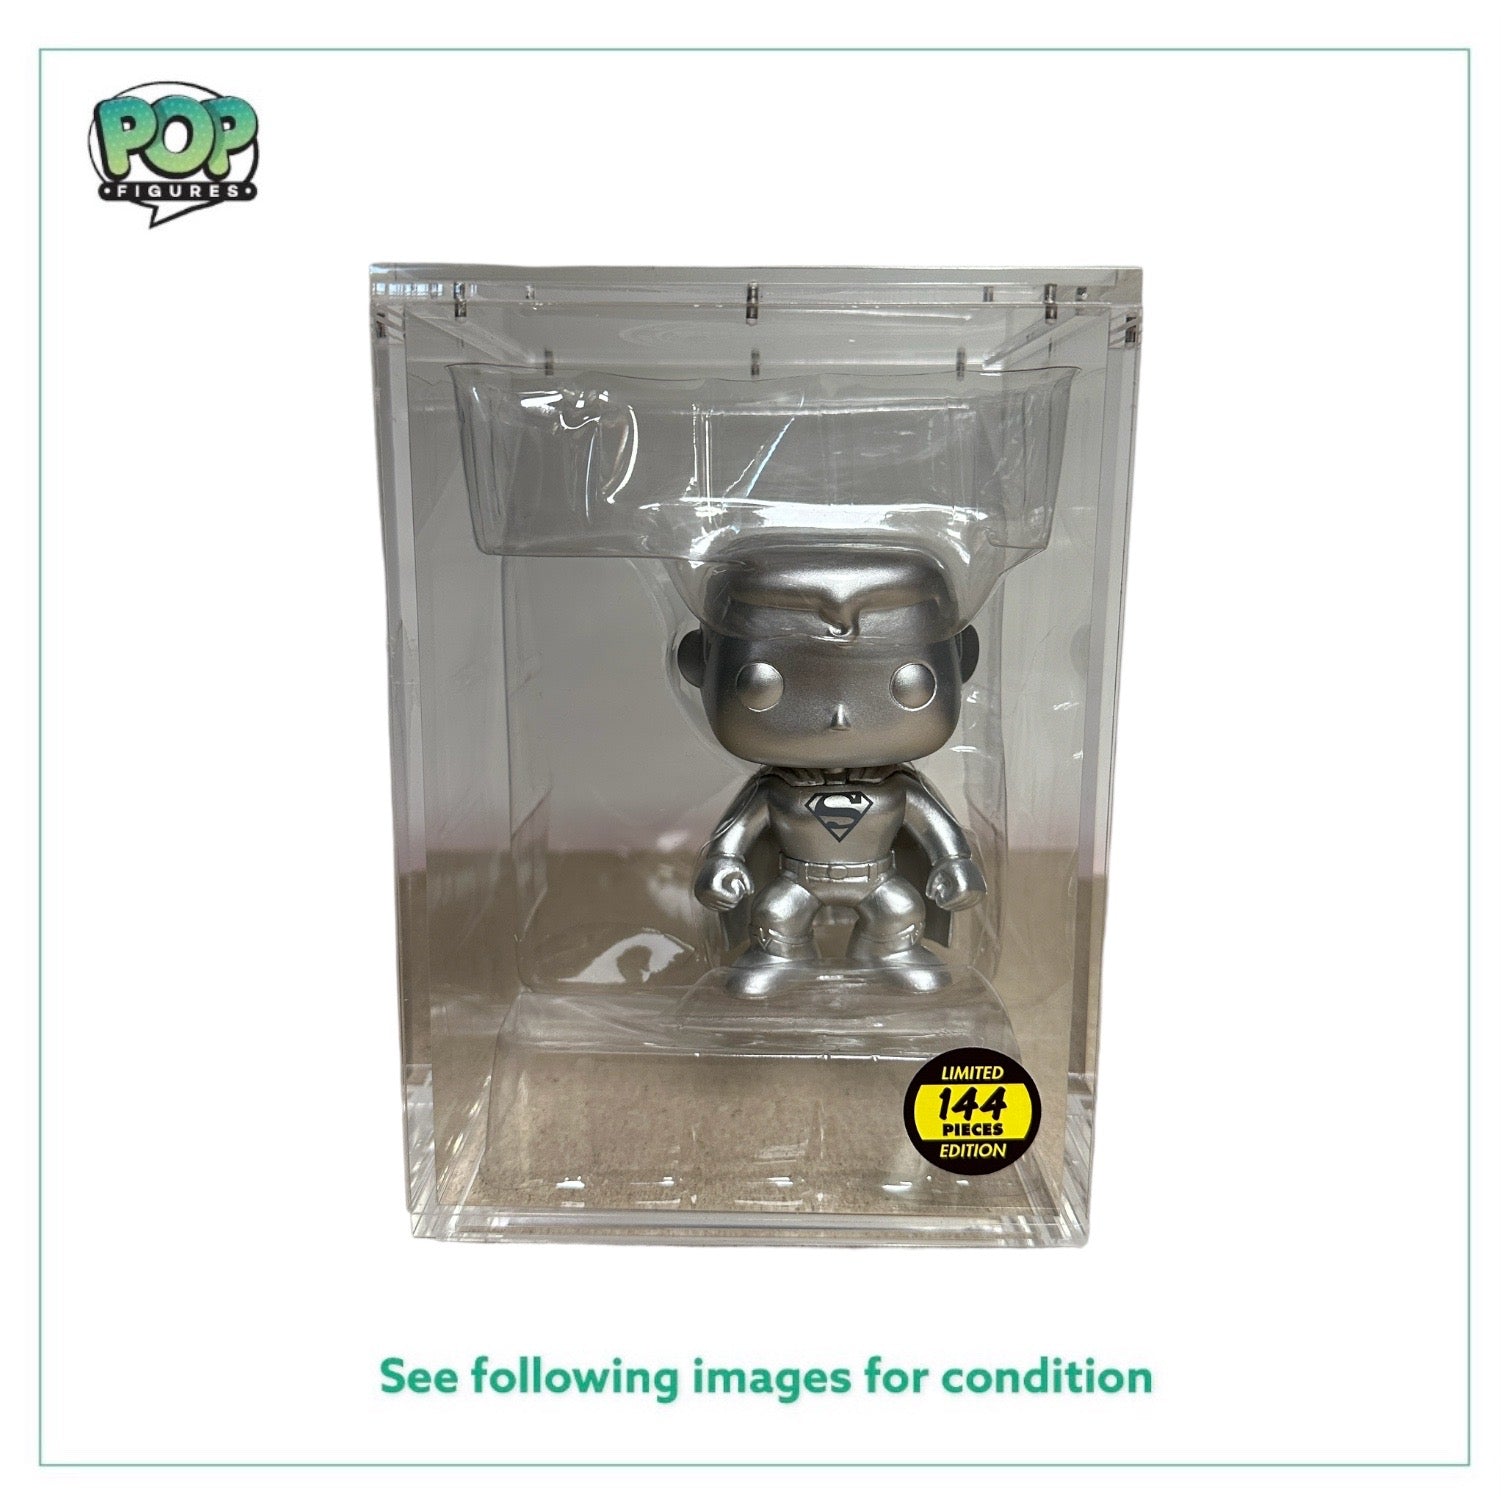 OUT OF BOX: Superman #07 (Silver) Funko Pop! - DC Super Heroes - Hot Topic Employees Exclusive LE144 Pcs